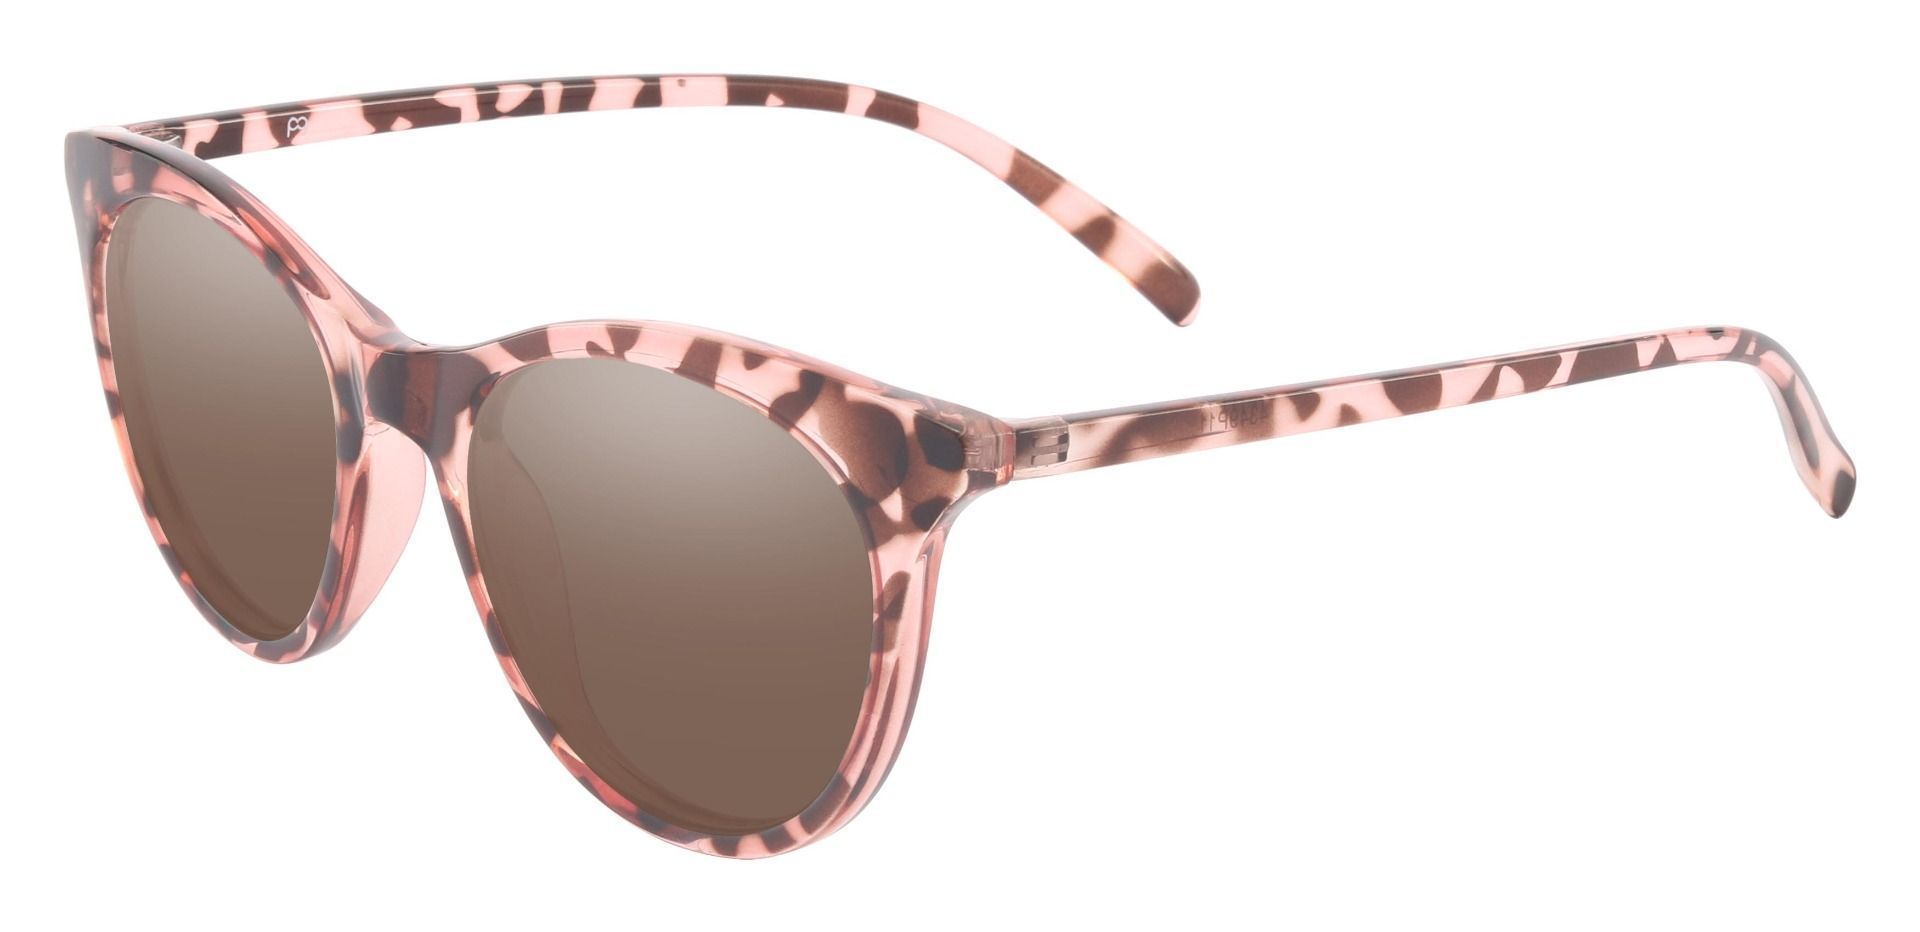 Valencia Cat Eye Prescription Sunglasses - Pink Frame With Brown Lenses